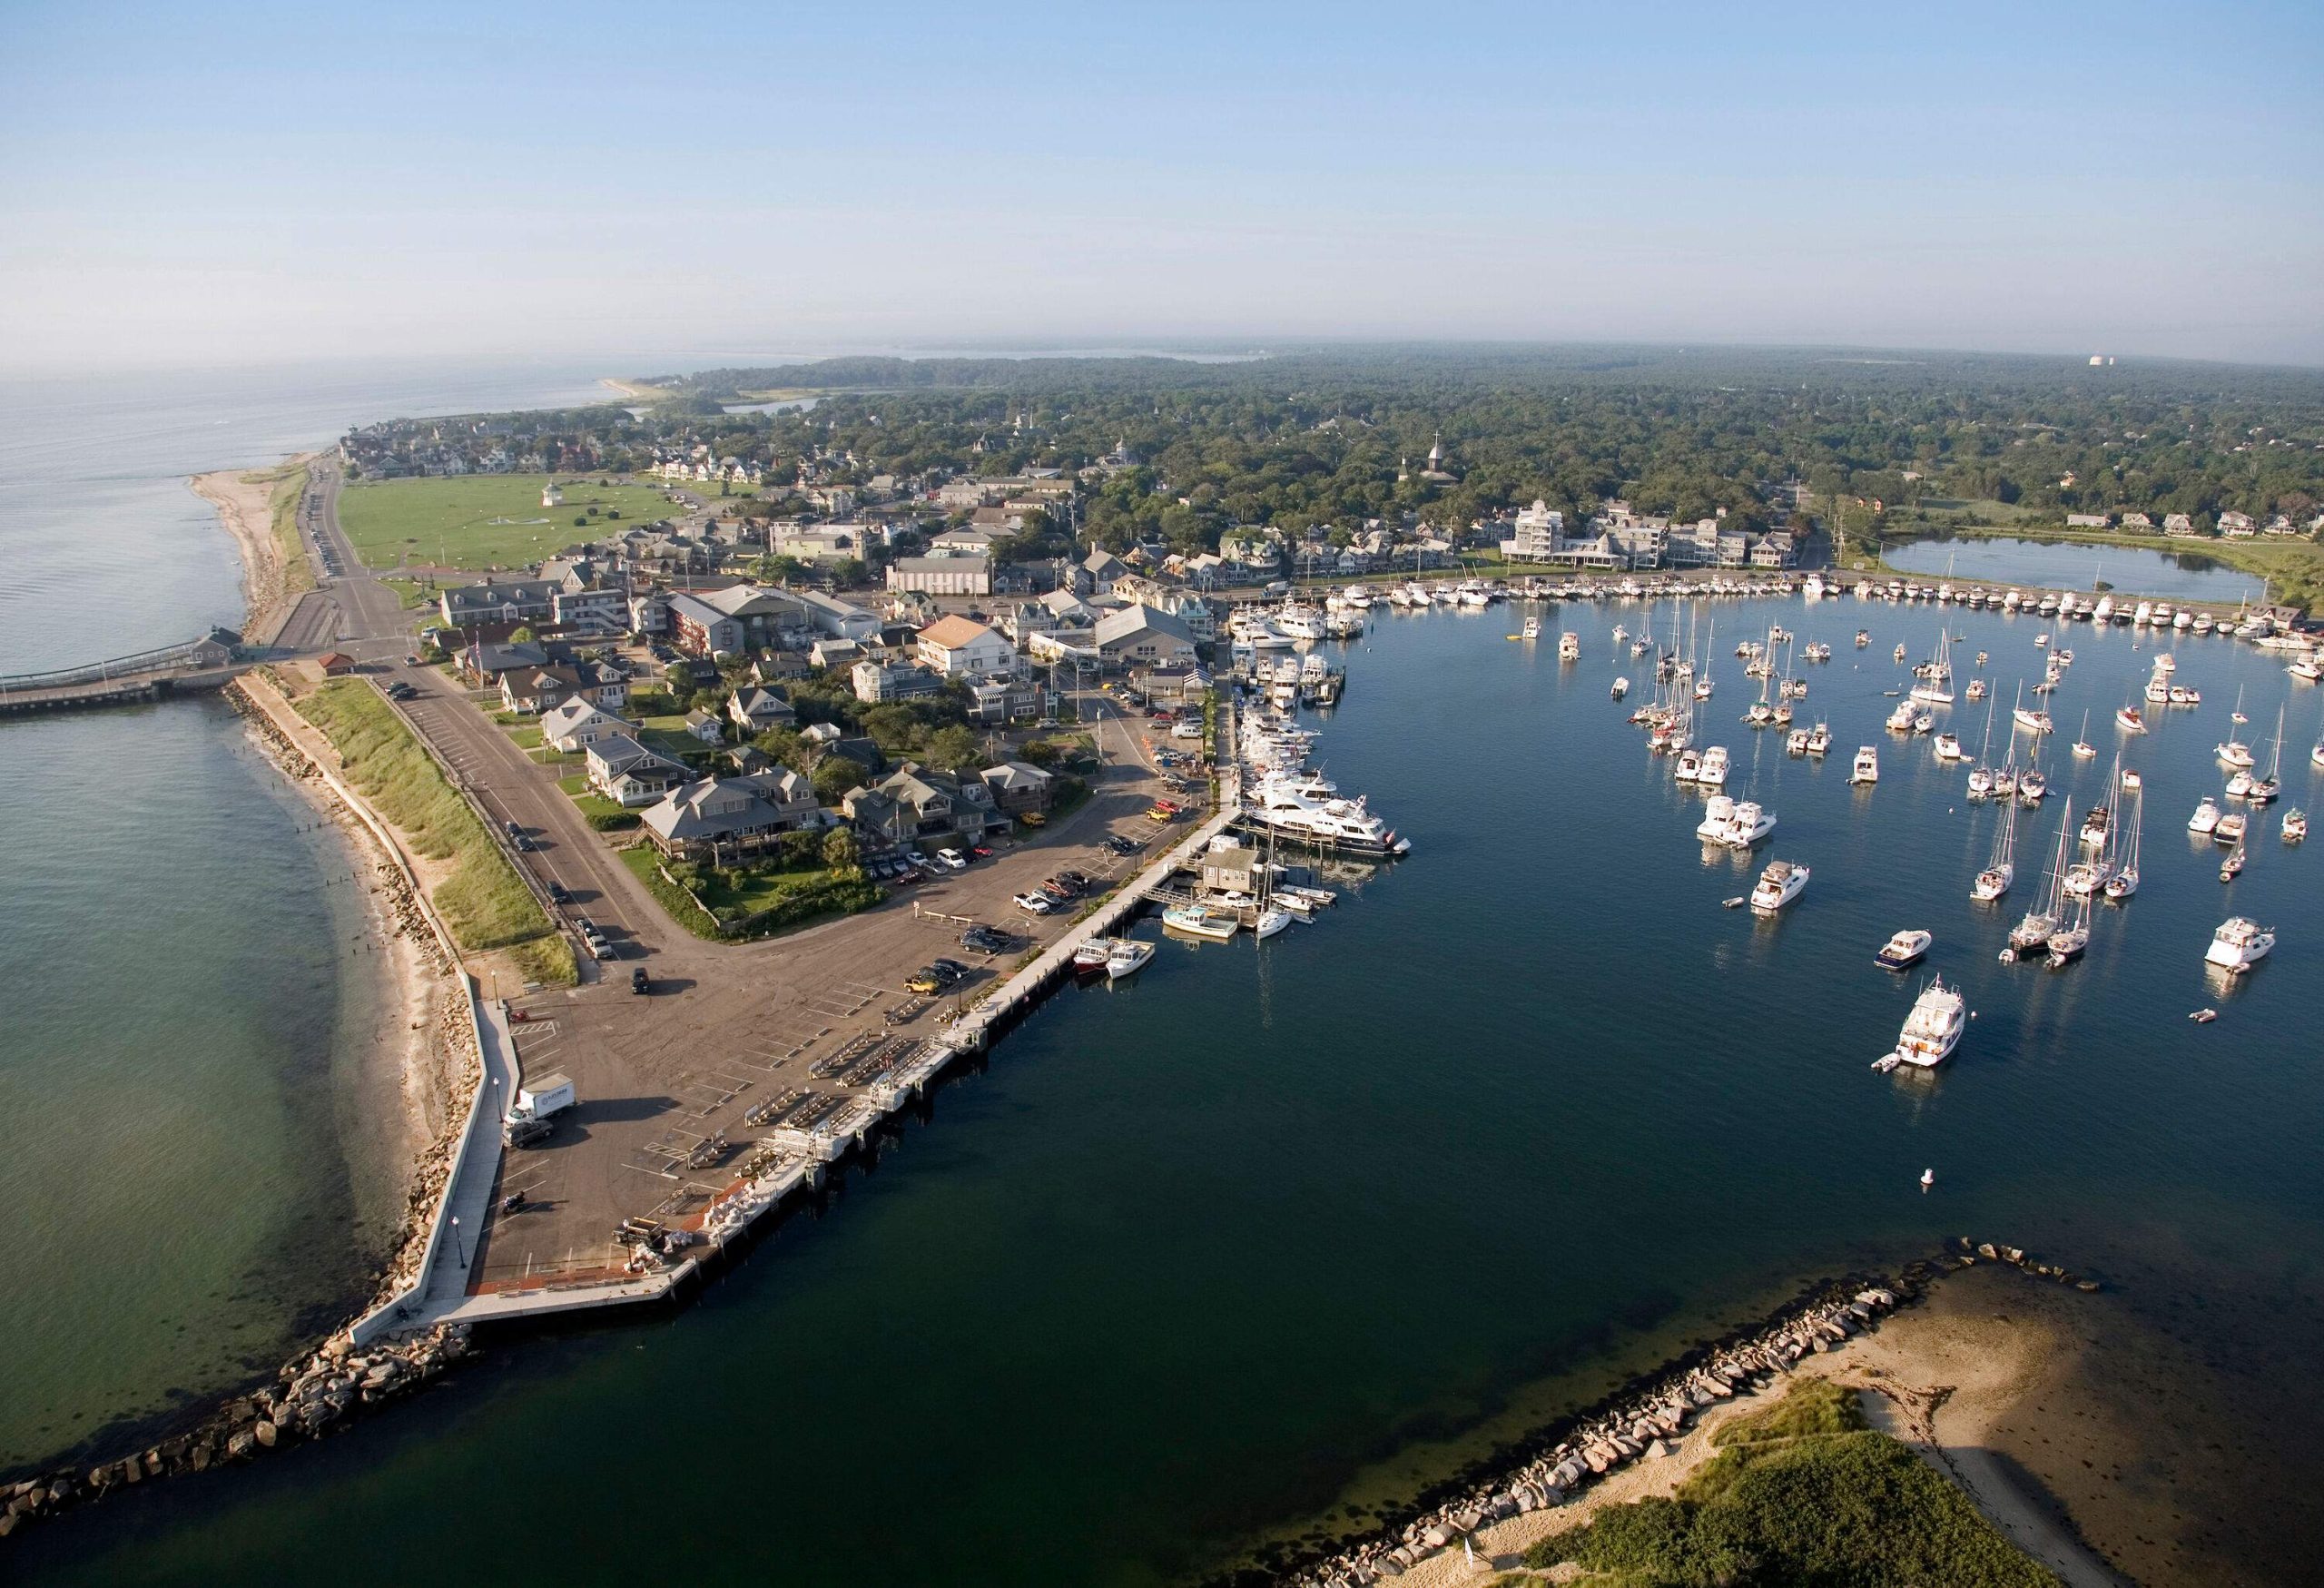 A picturesque bay is embraced by a bustling marina filled with boats, accompanied by the charm of a nearby town and the tranquilly of wooded surroundings.